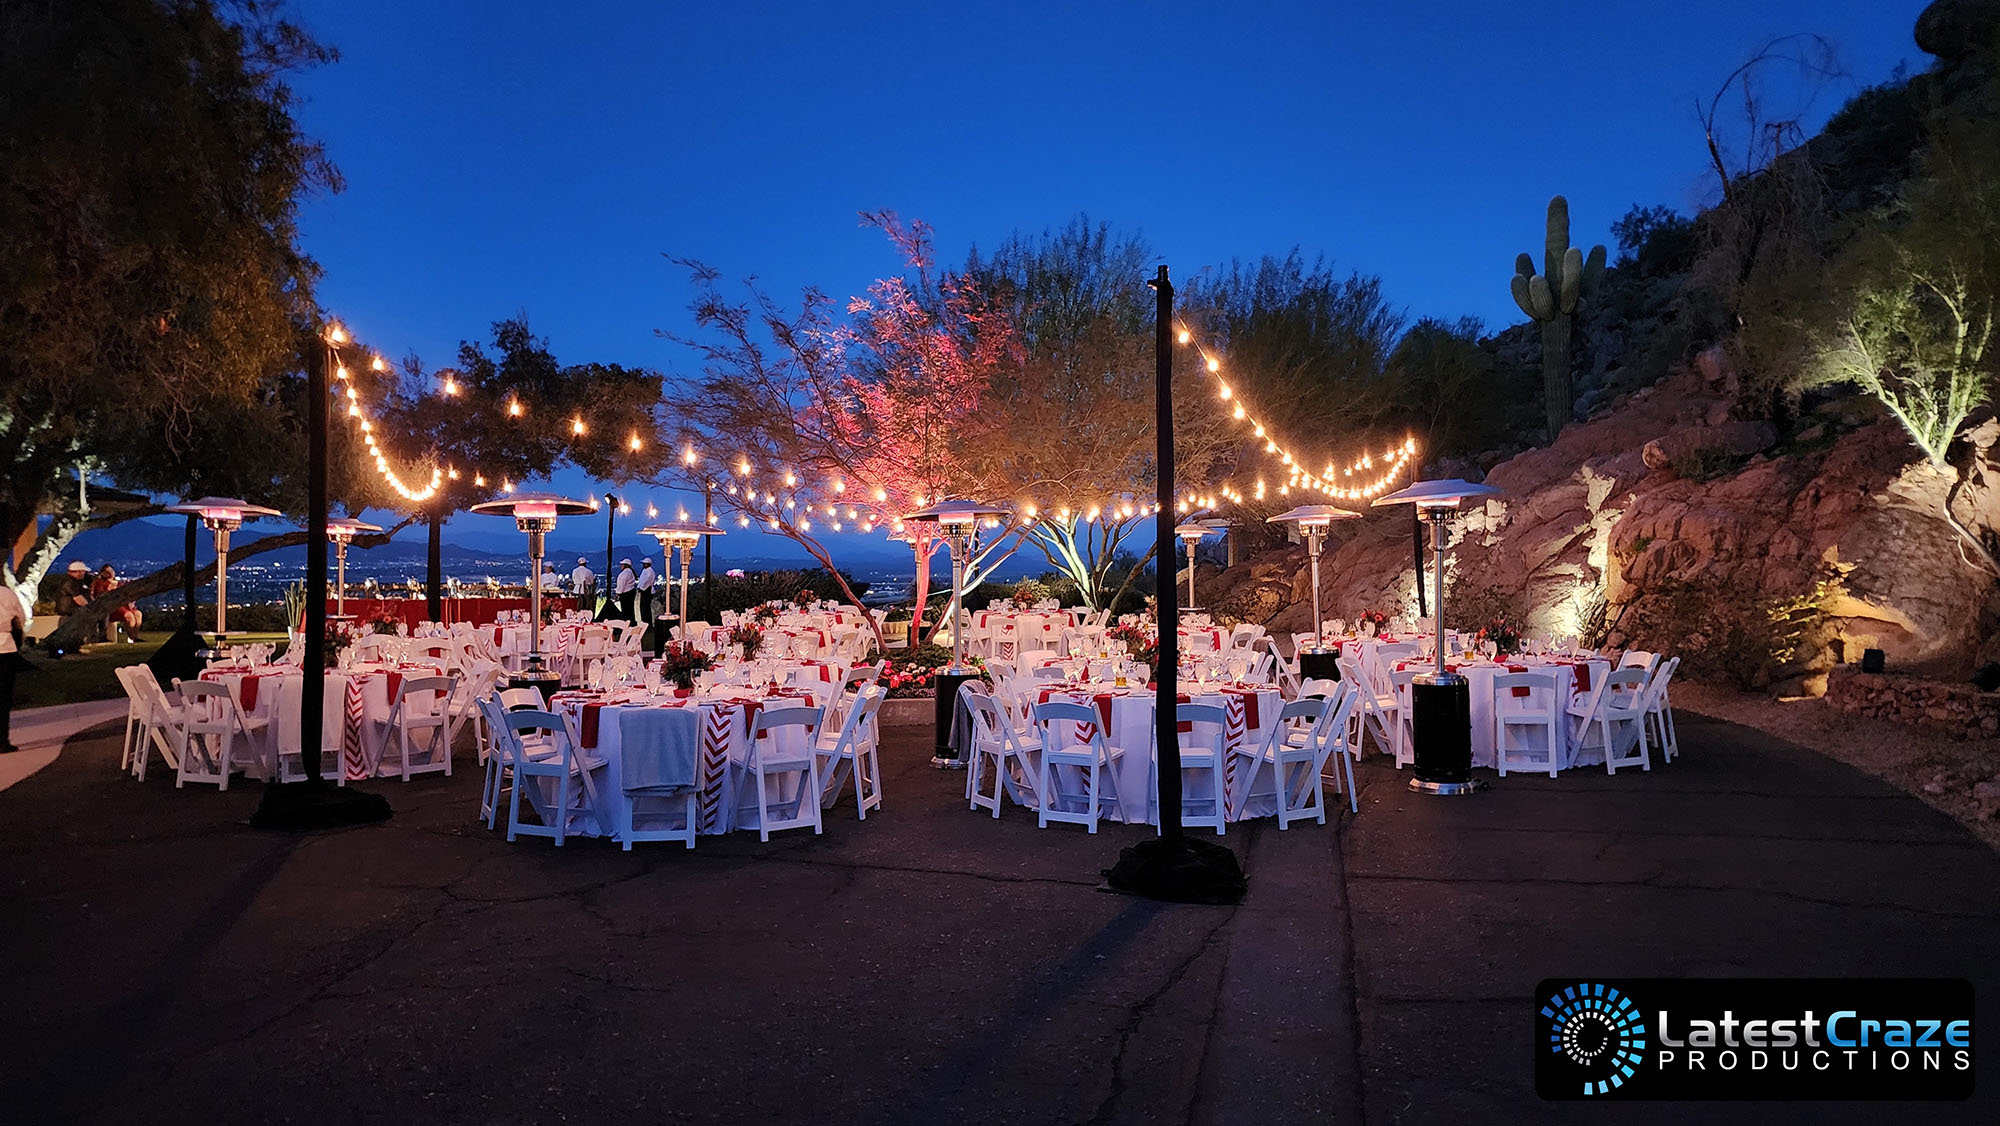 bistro string lighting outdoor event Latest Craze Productions